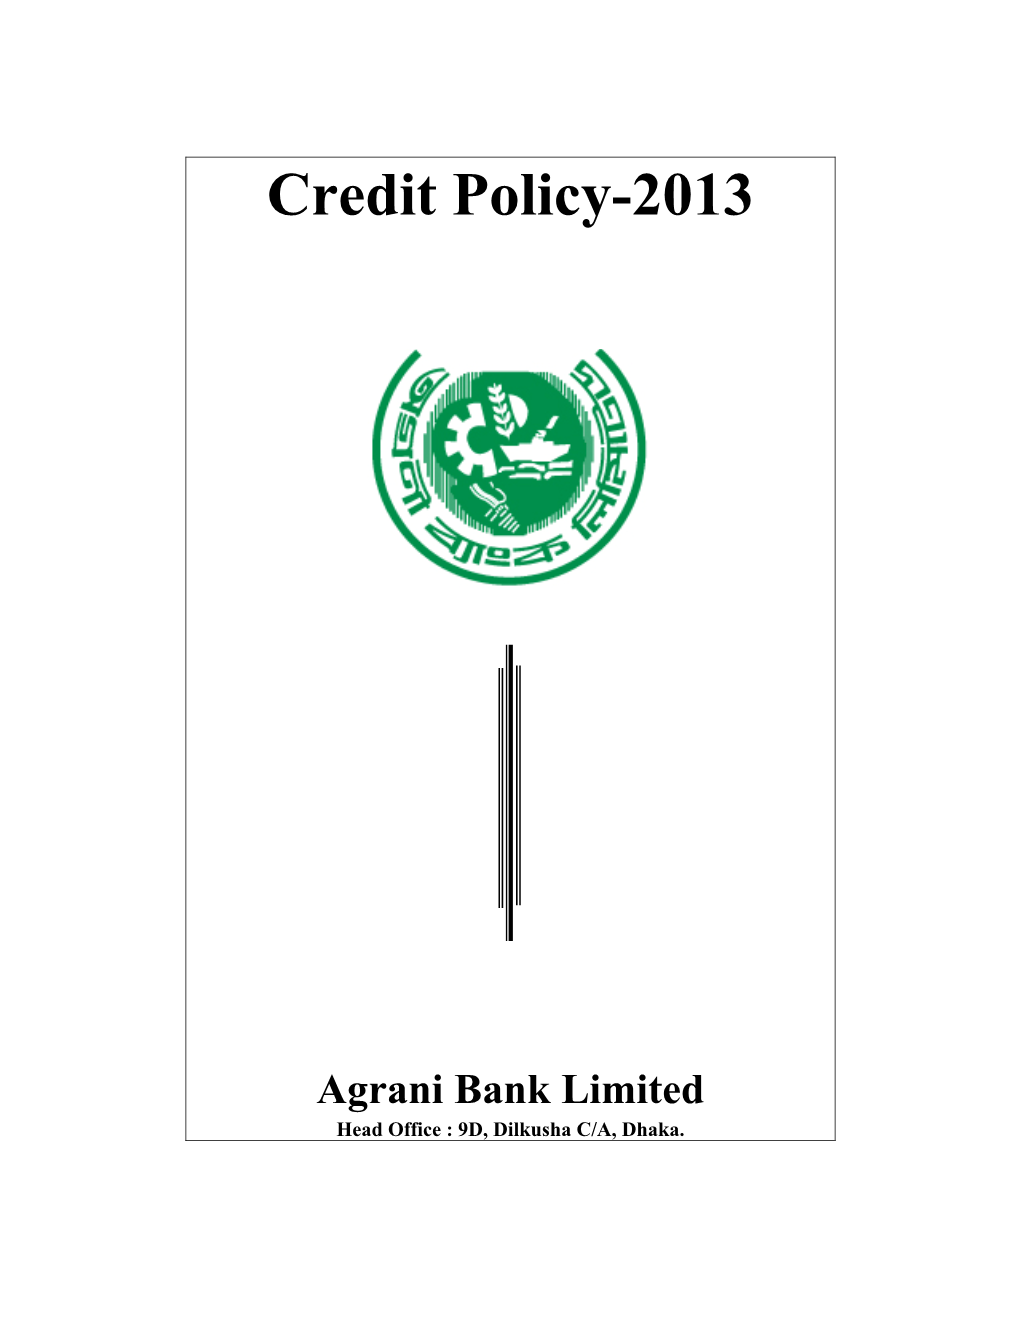 Credit Policies 2013 (Approved)